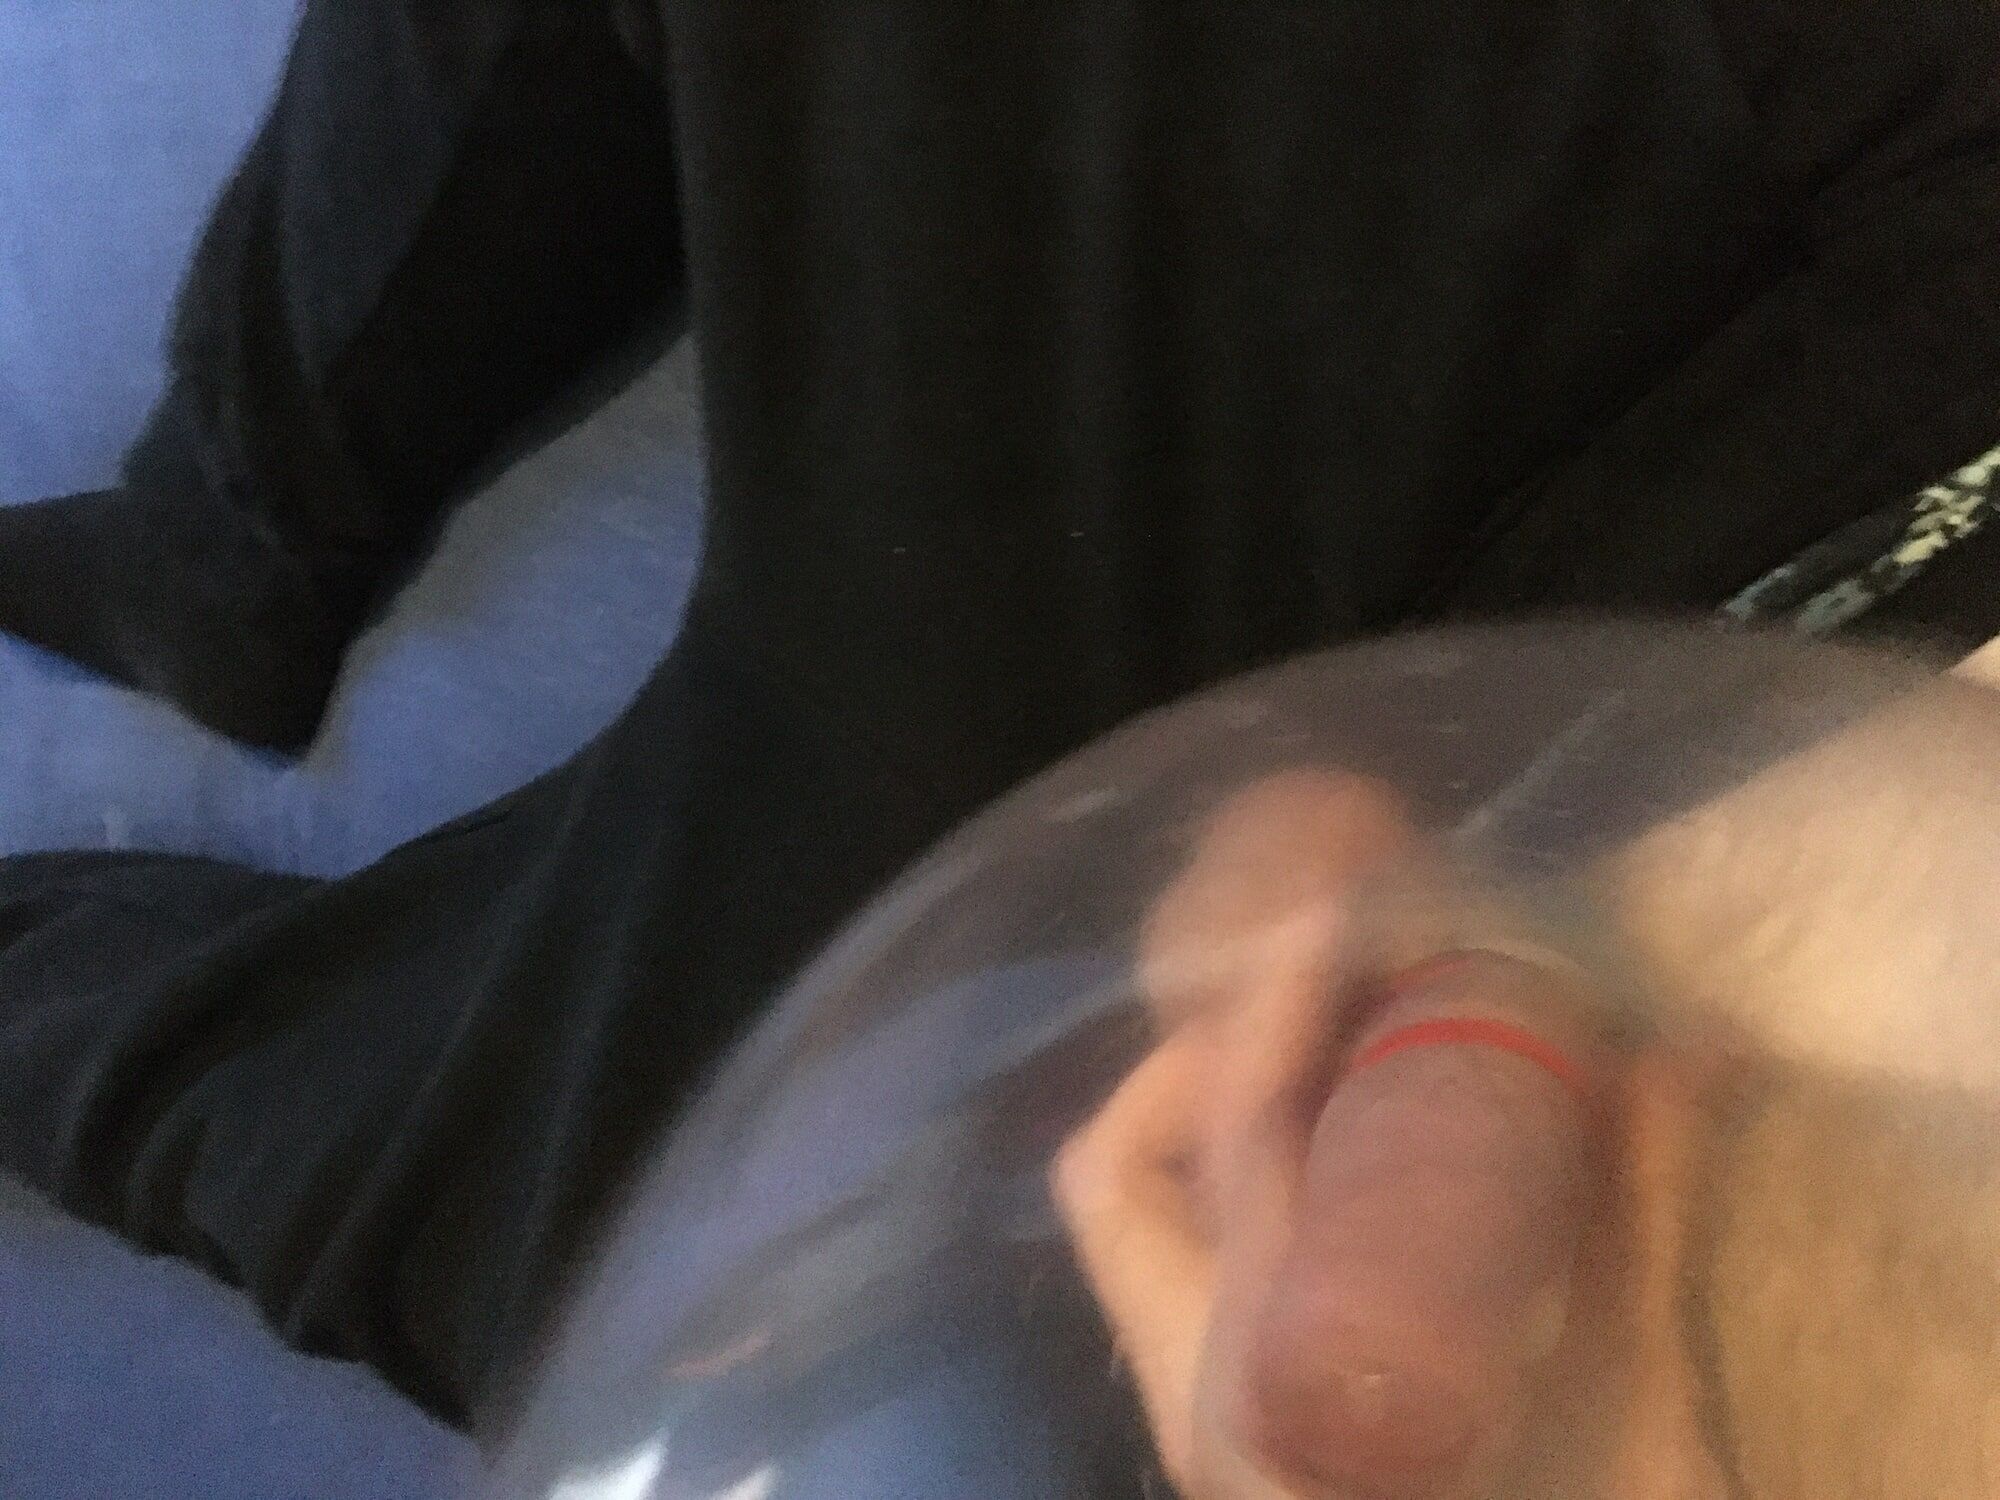  Haired Dick And Balls With Rubber Bands Condom Ballon  fuck #13